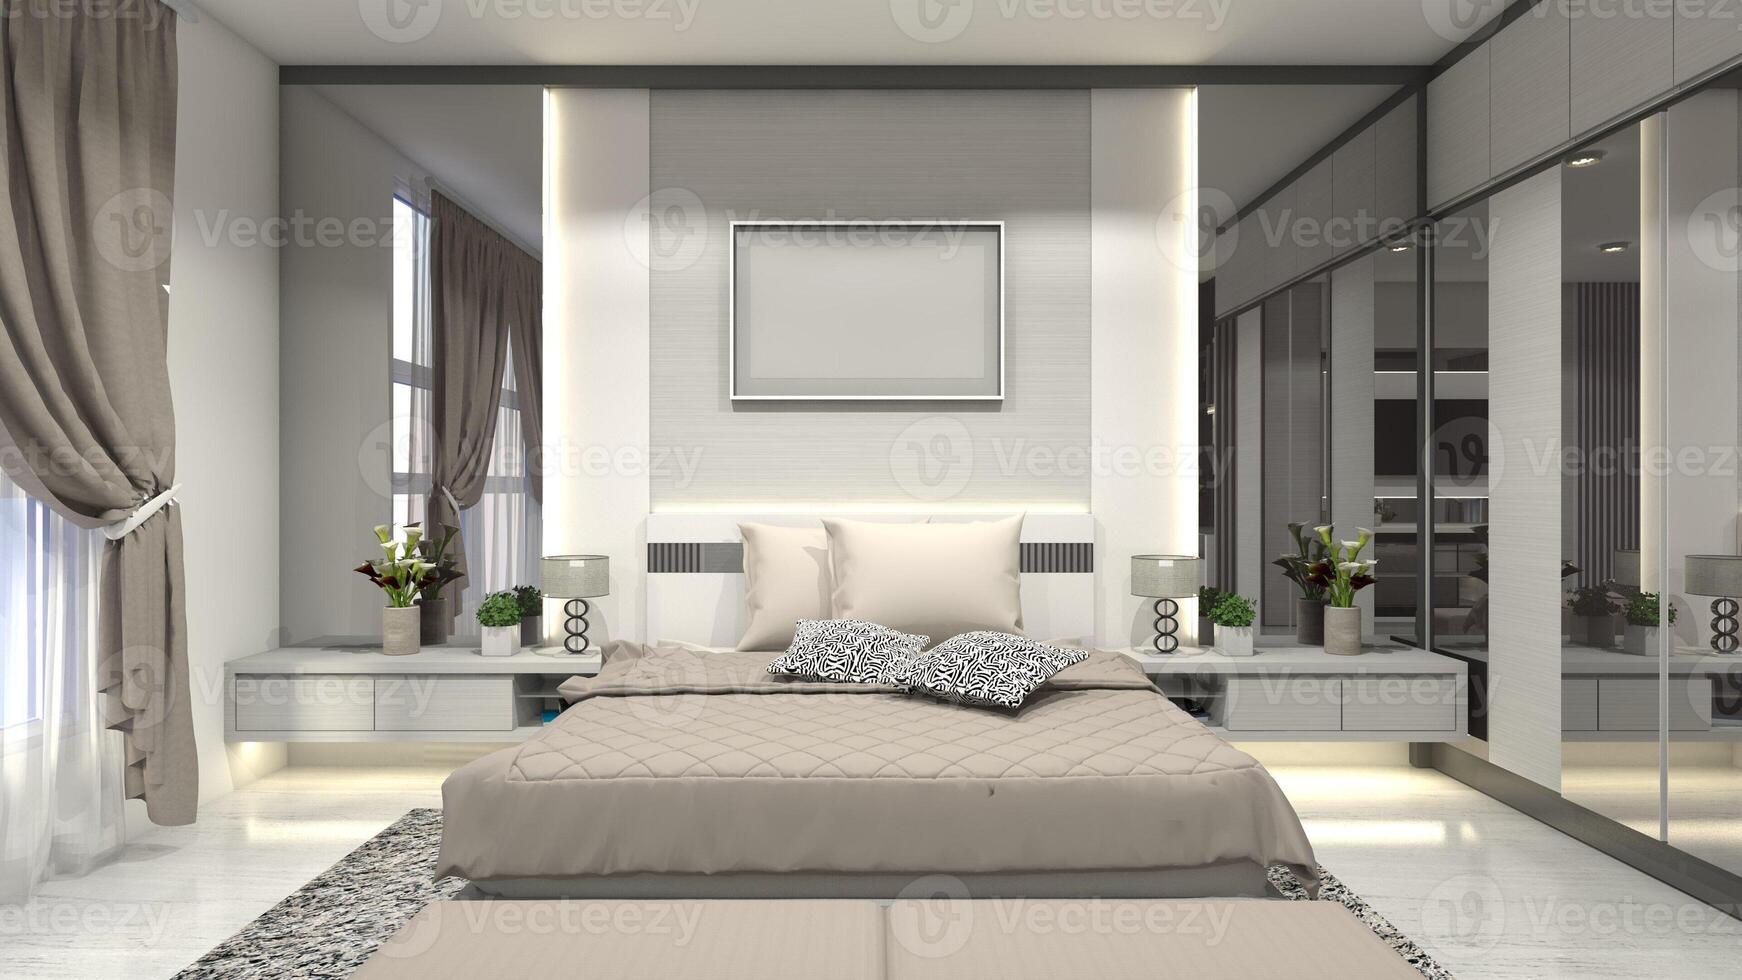 Modern and Luxury Master Bedroom with Back Wall Panel Decoration 3D Illustration photo